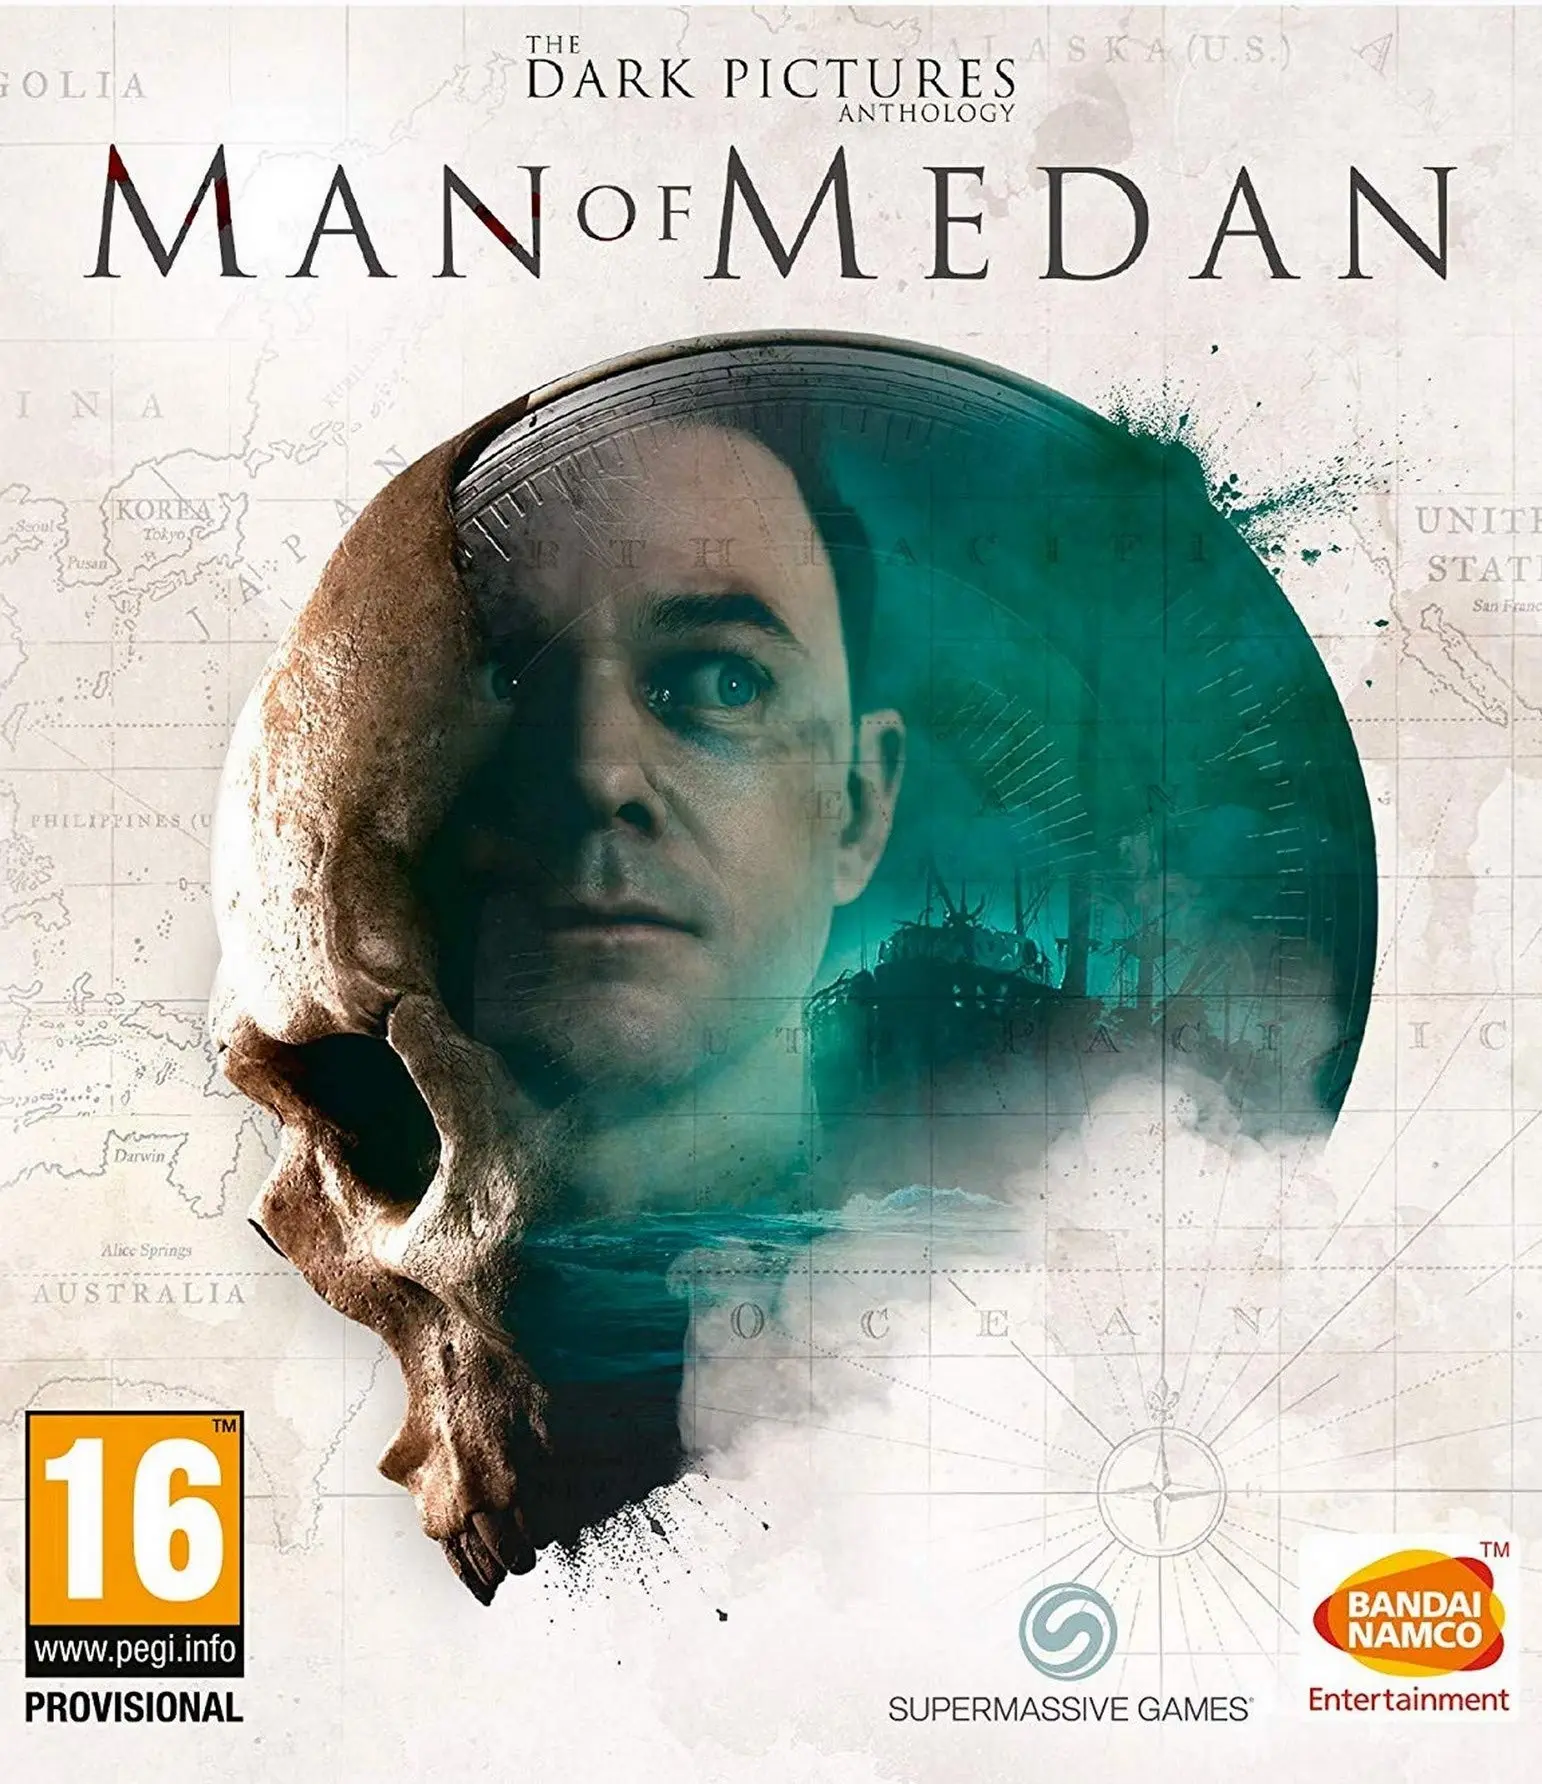 The Dark Pictures Anthology - Man of Medan Pre Order Edition (PC) - Steam - Digital Code